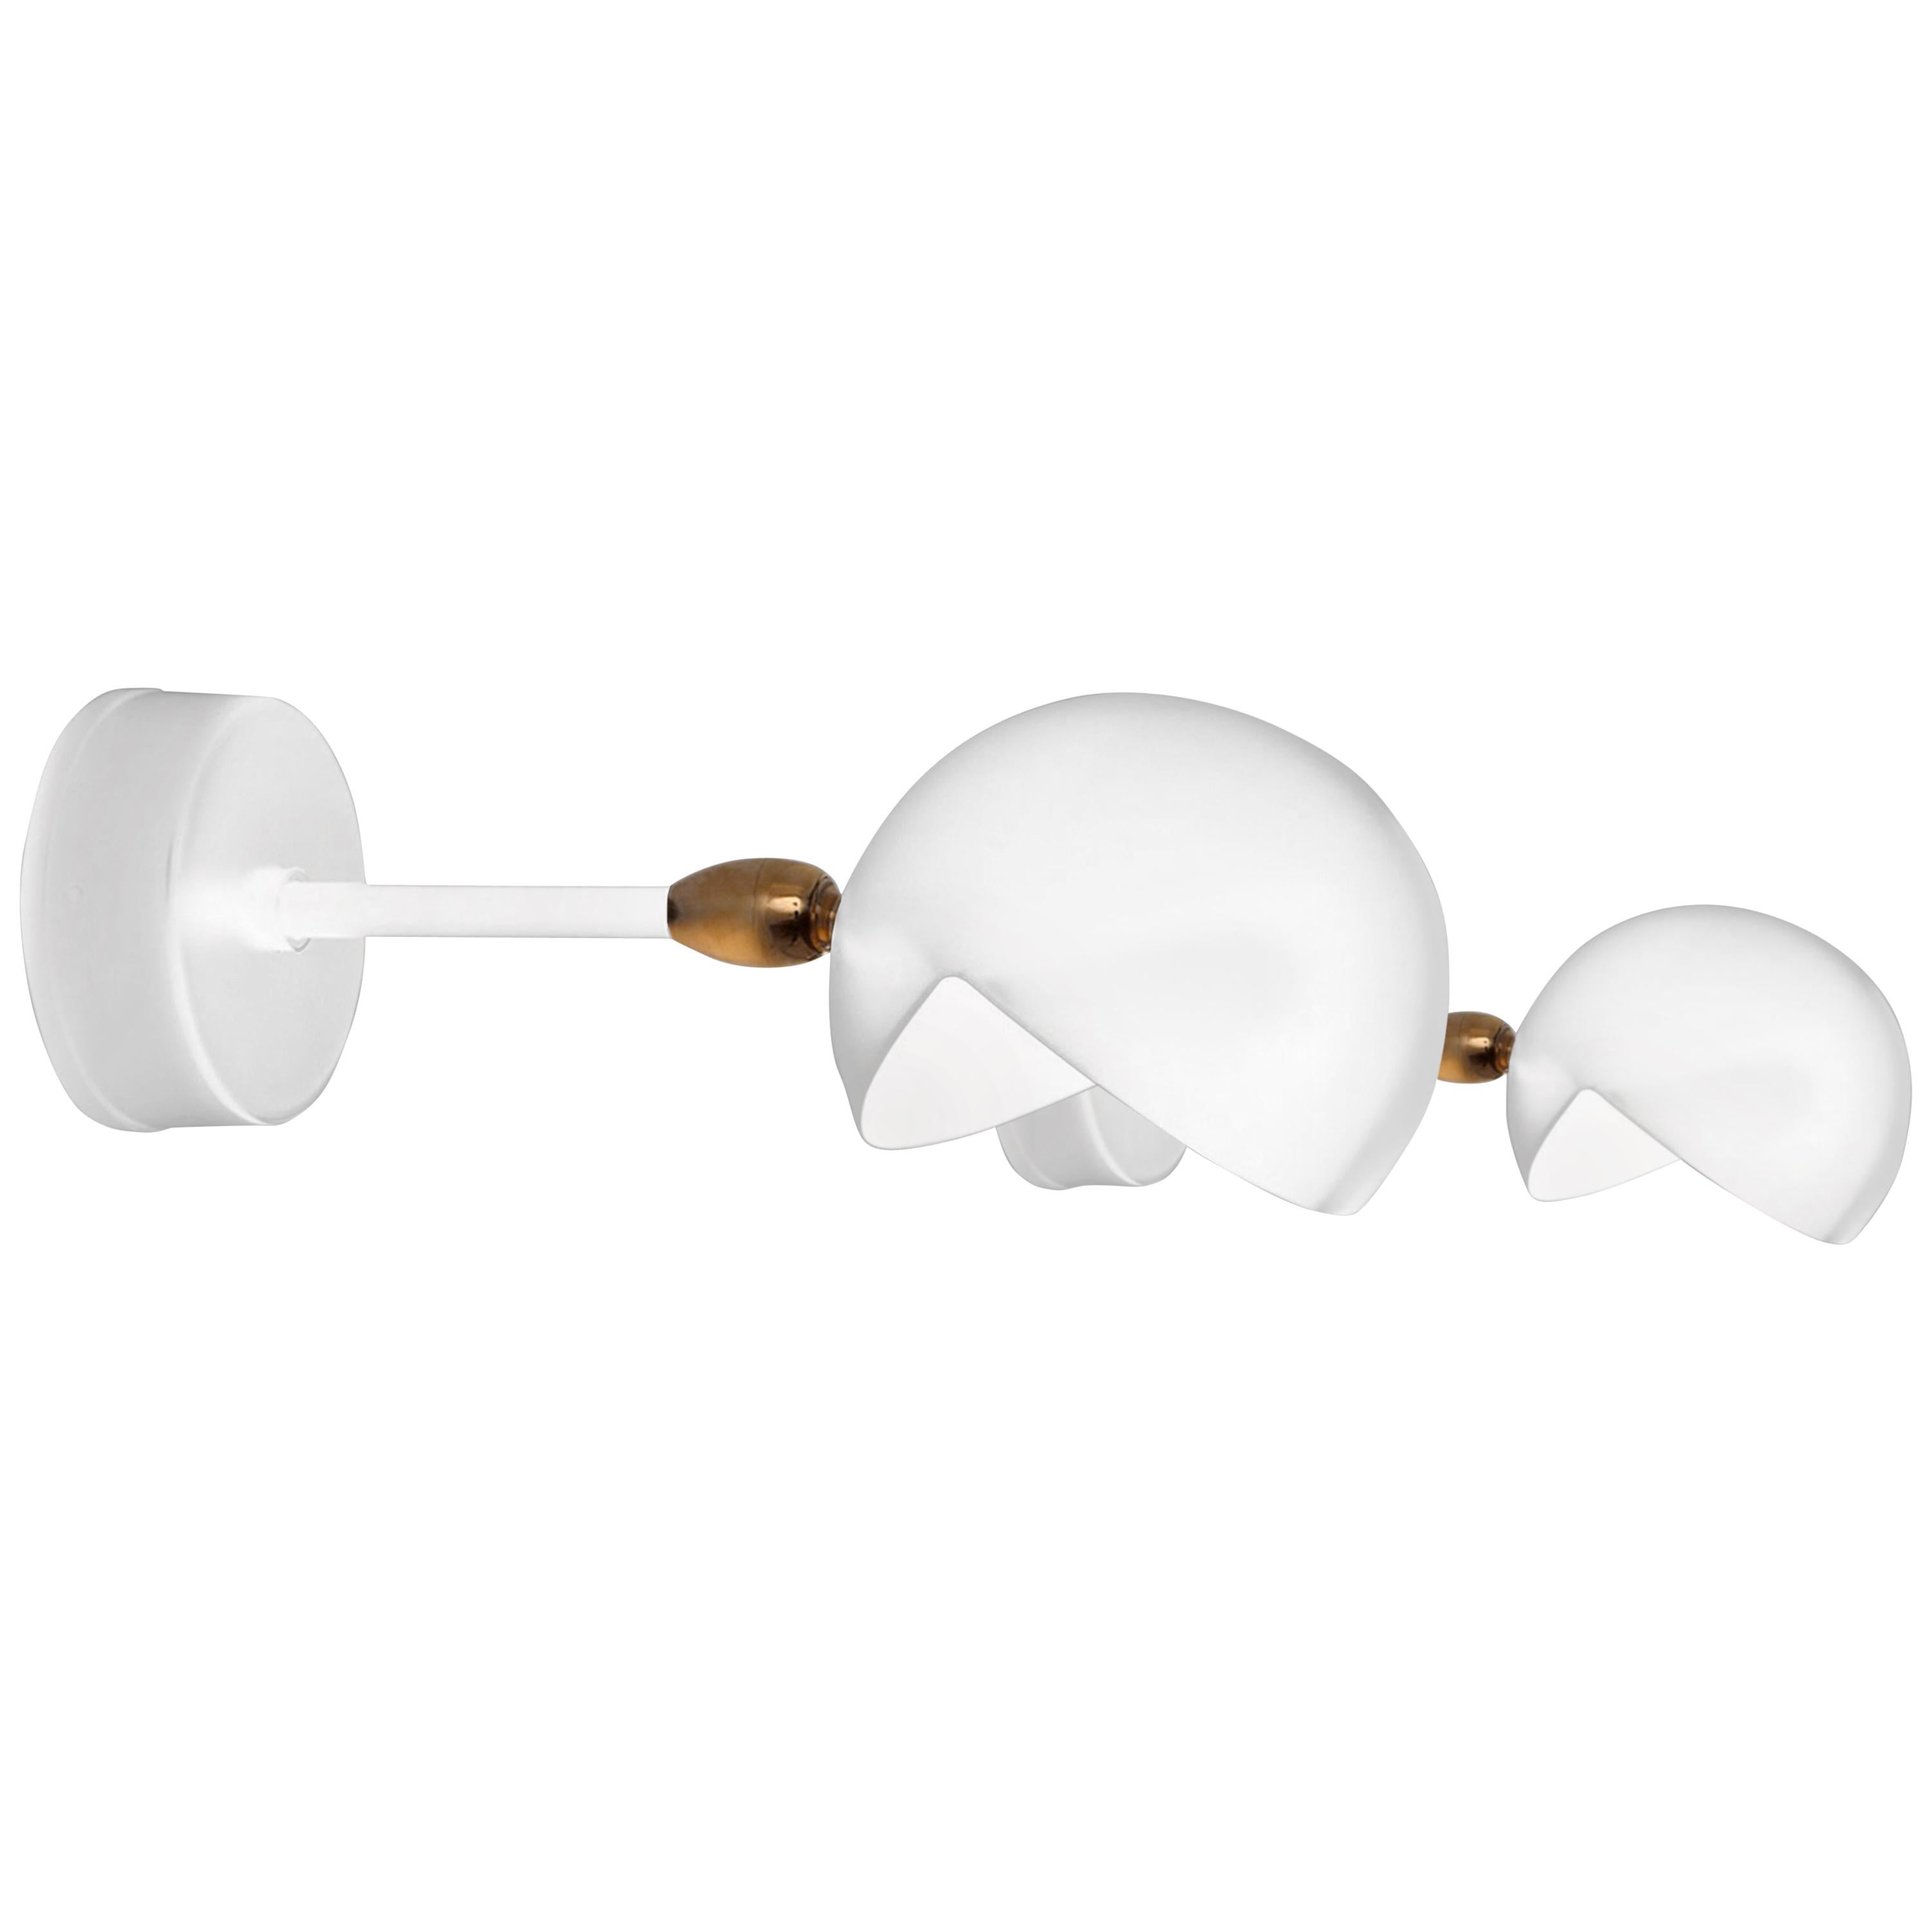 Serge Mouille Mid-Century Modern White Eye Sconce Wall Lamp Set For Sale